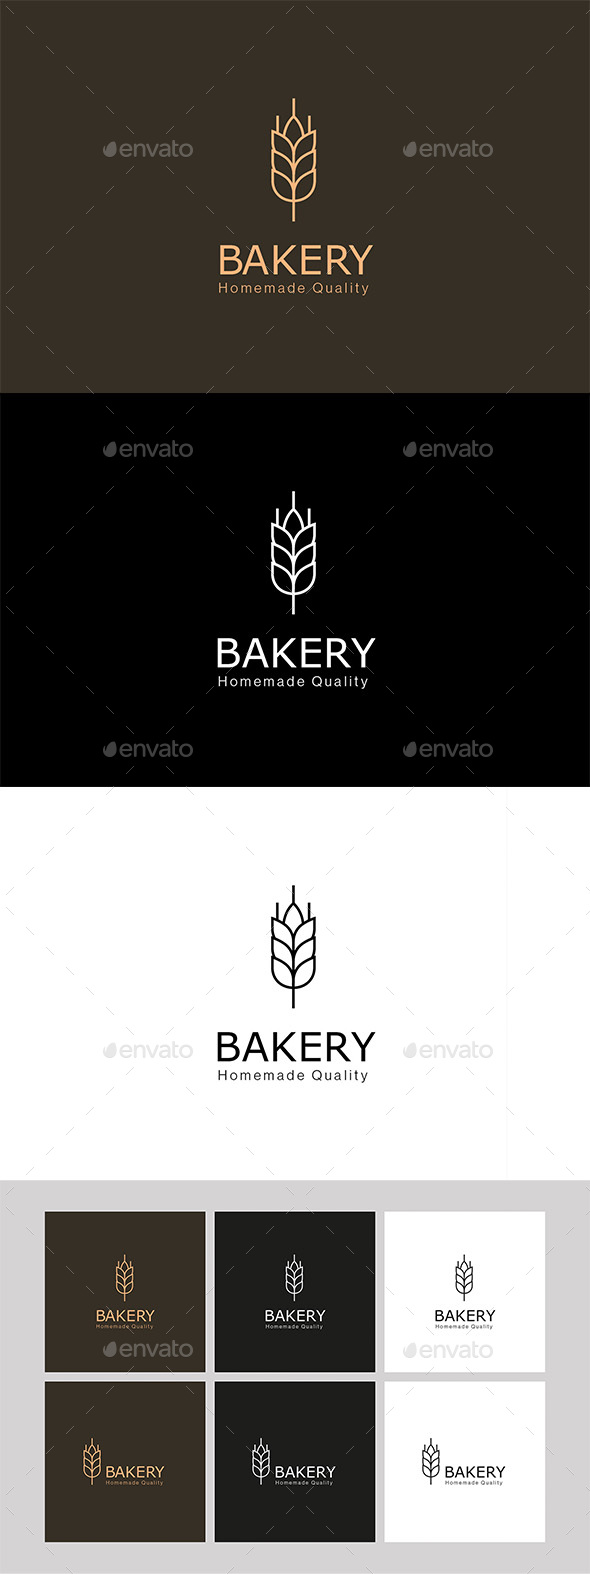 [DOWNLOAD]Bakery Logo Template